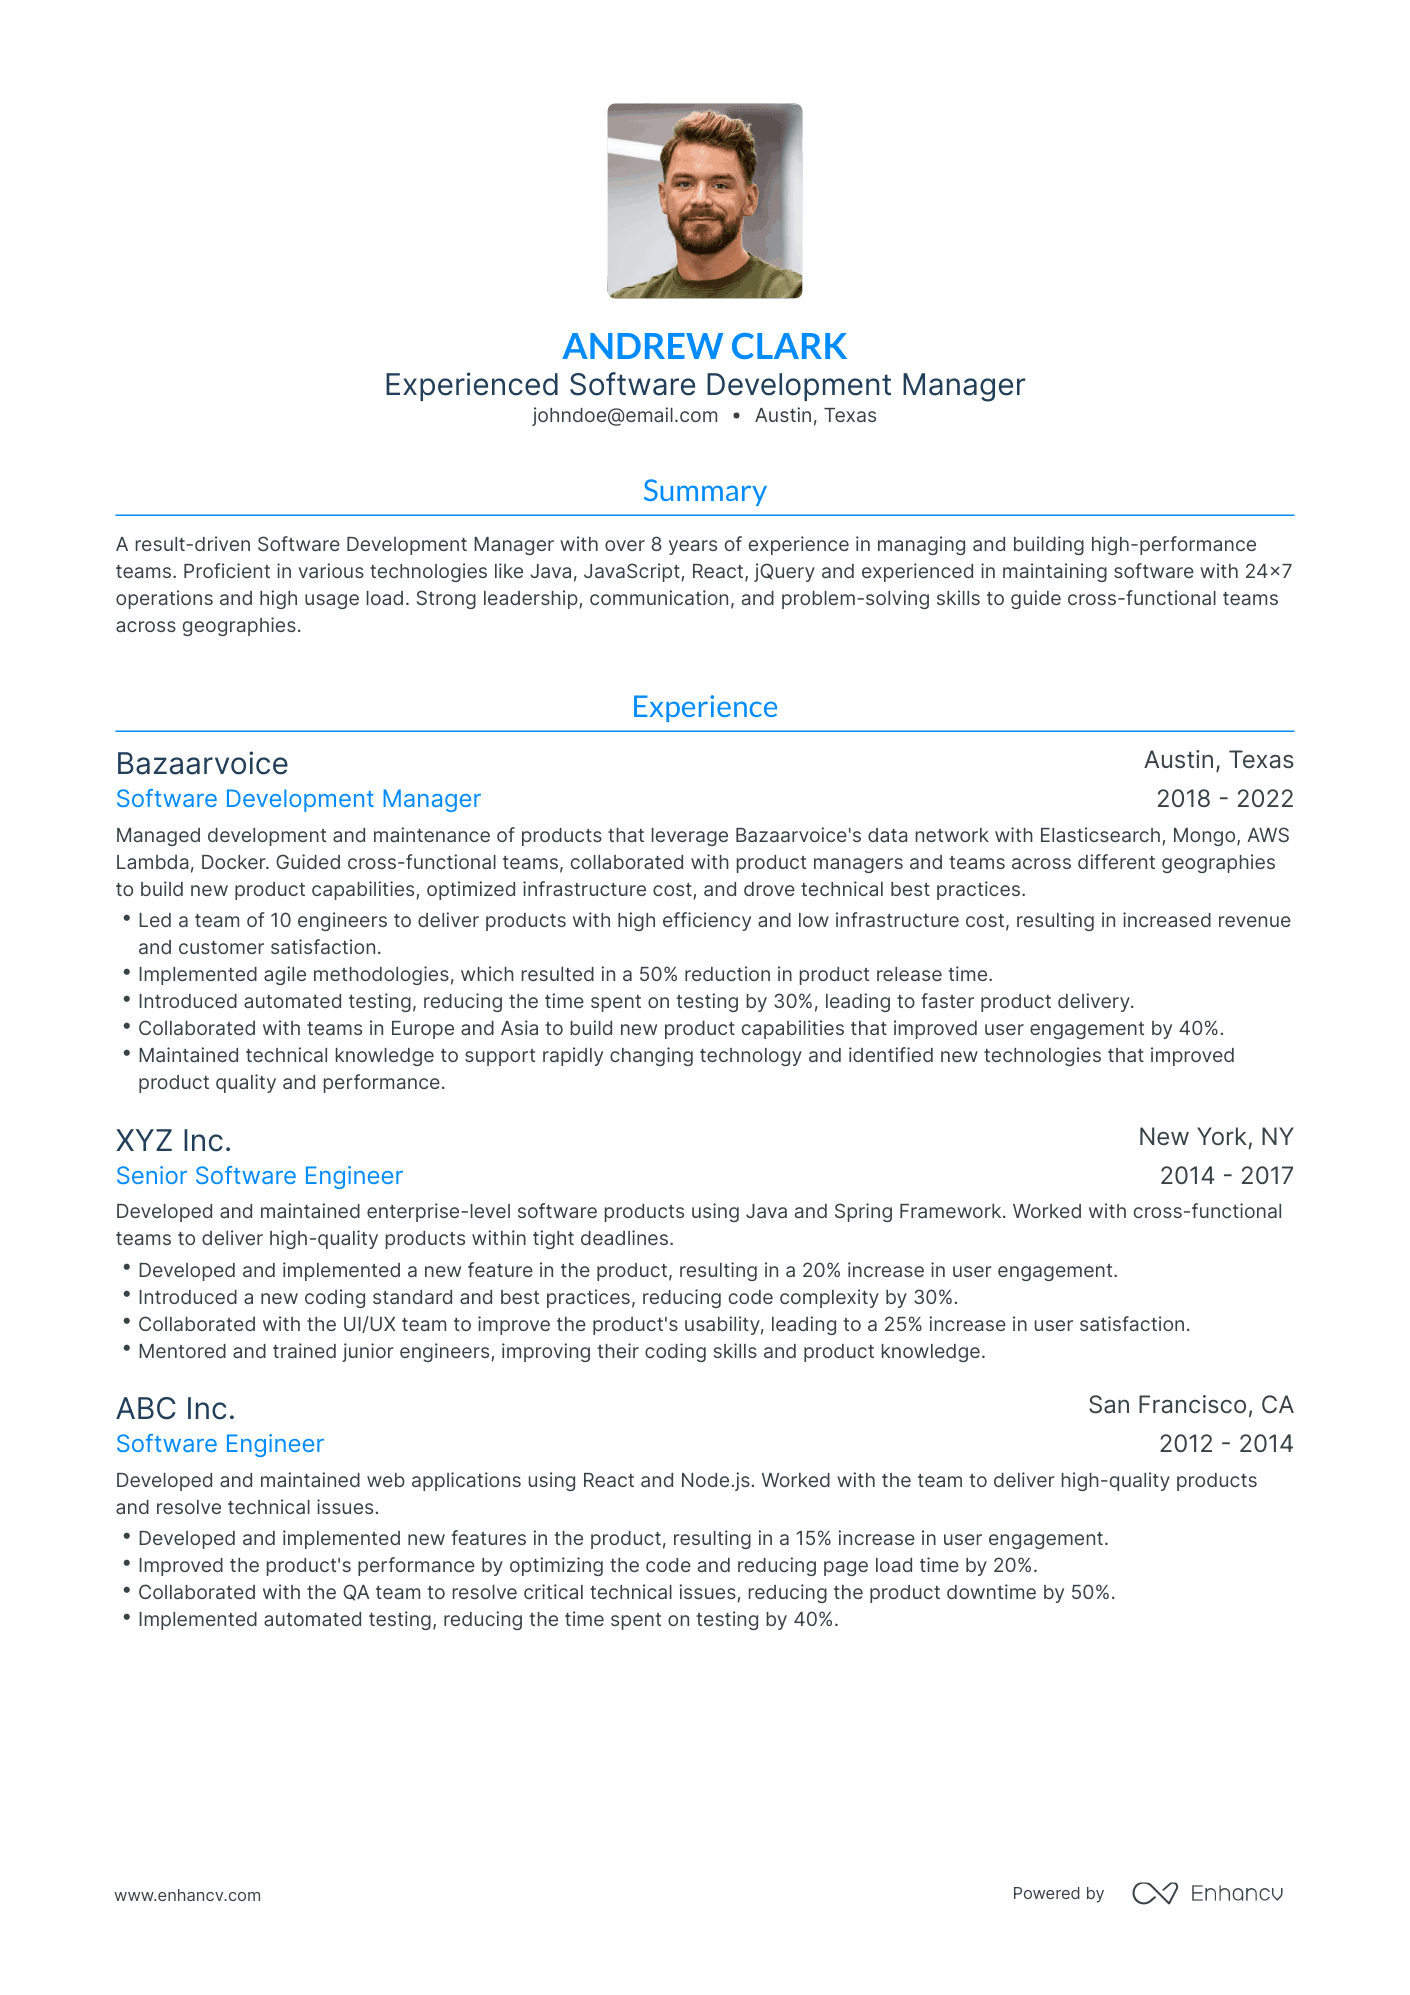 Traditional Software Development Manager Resume Template